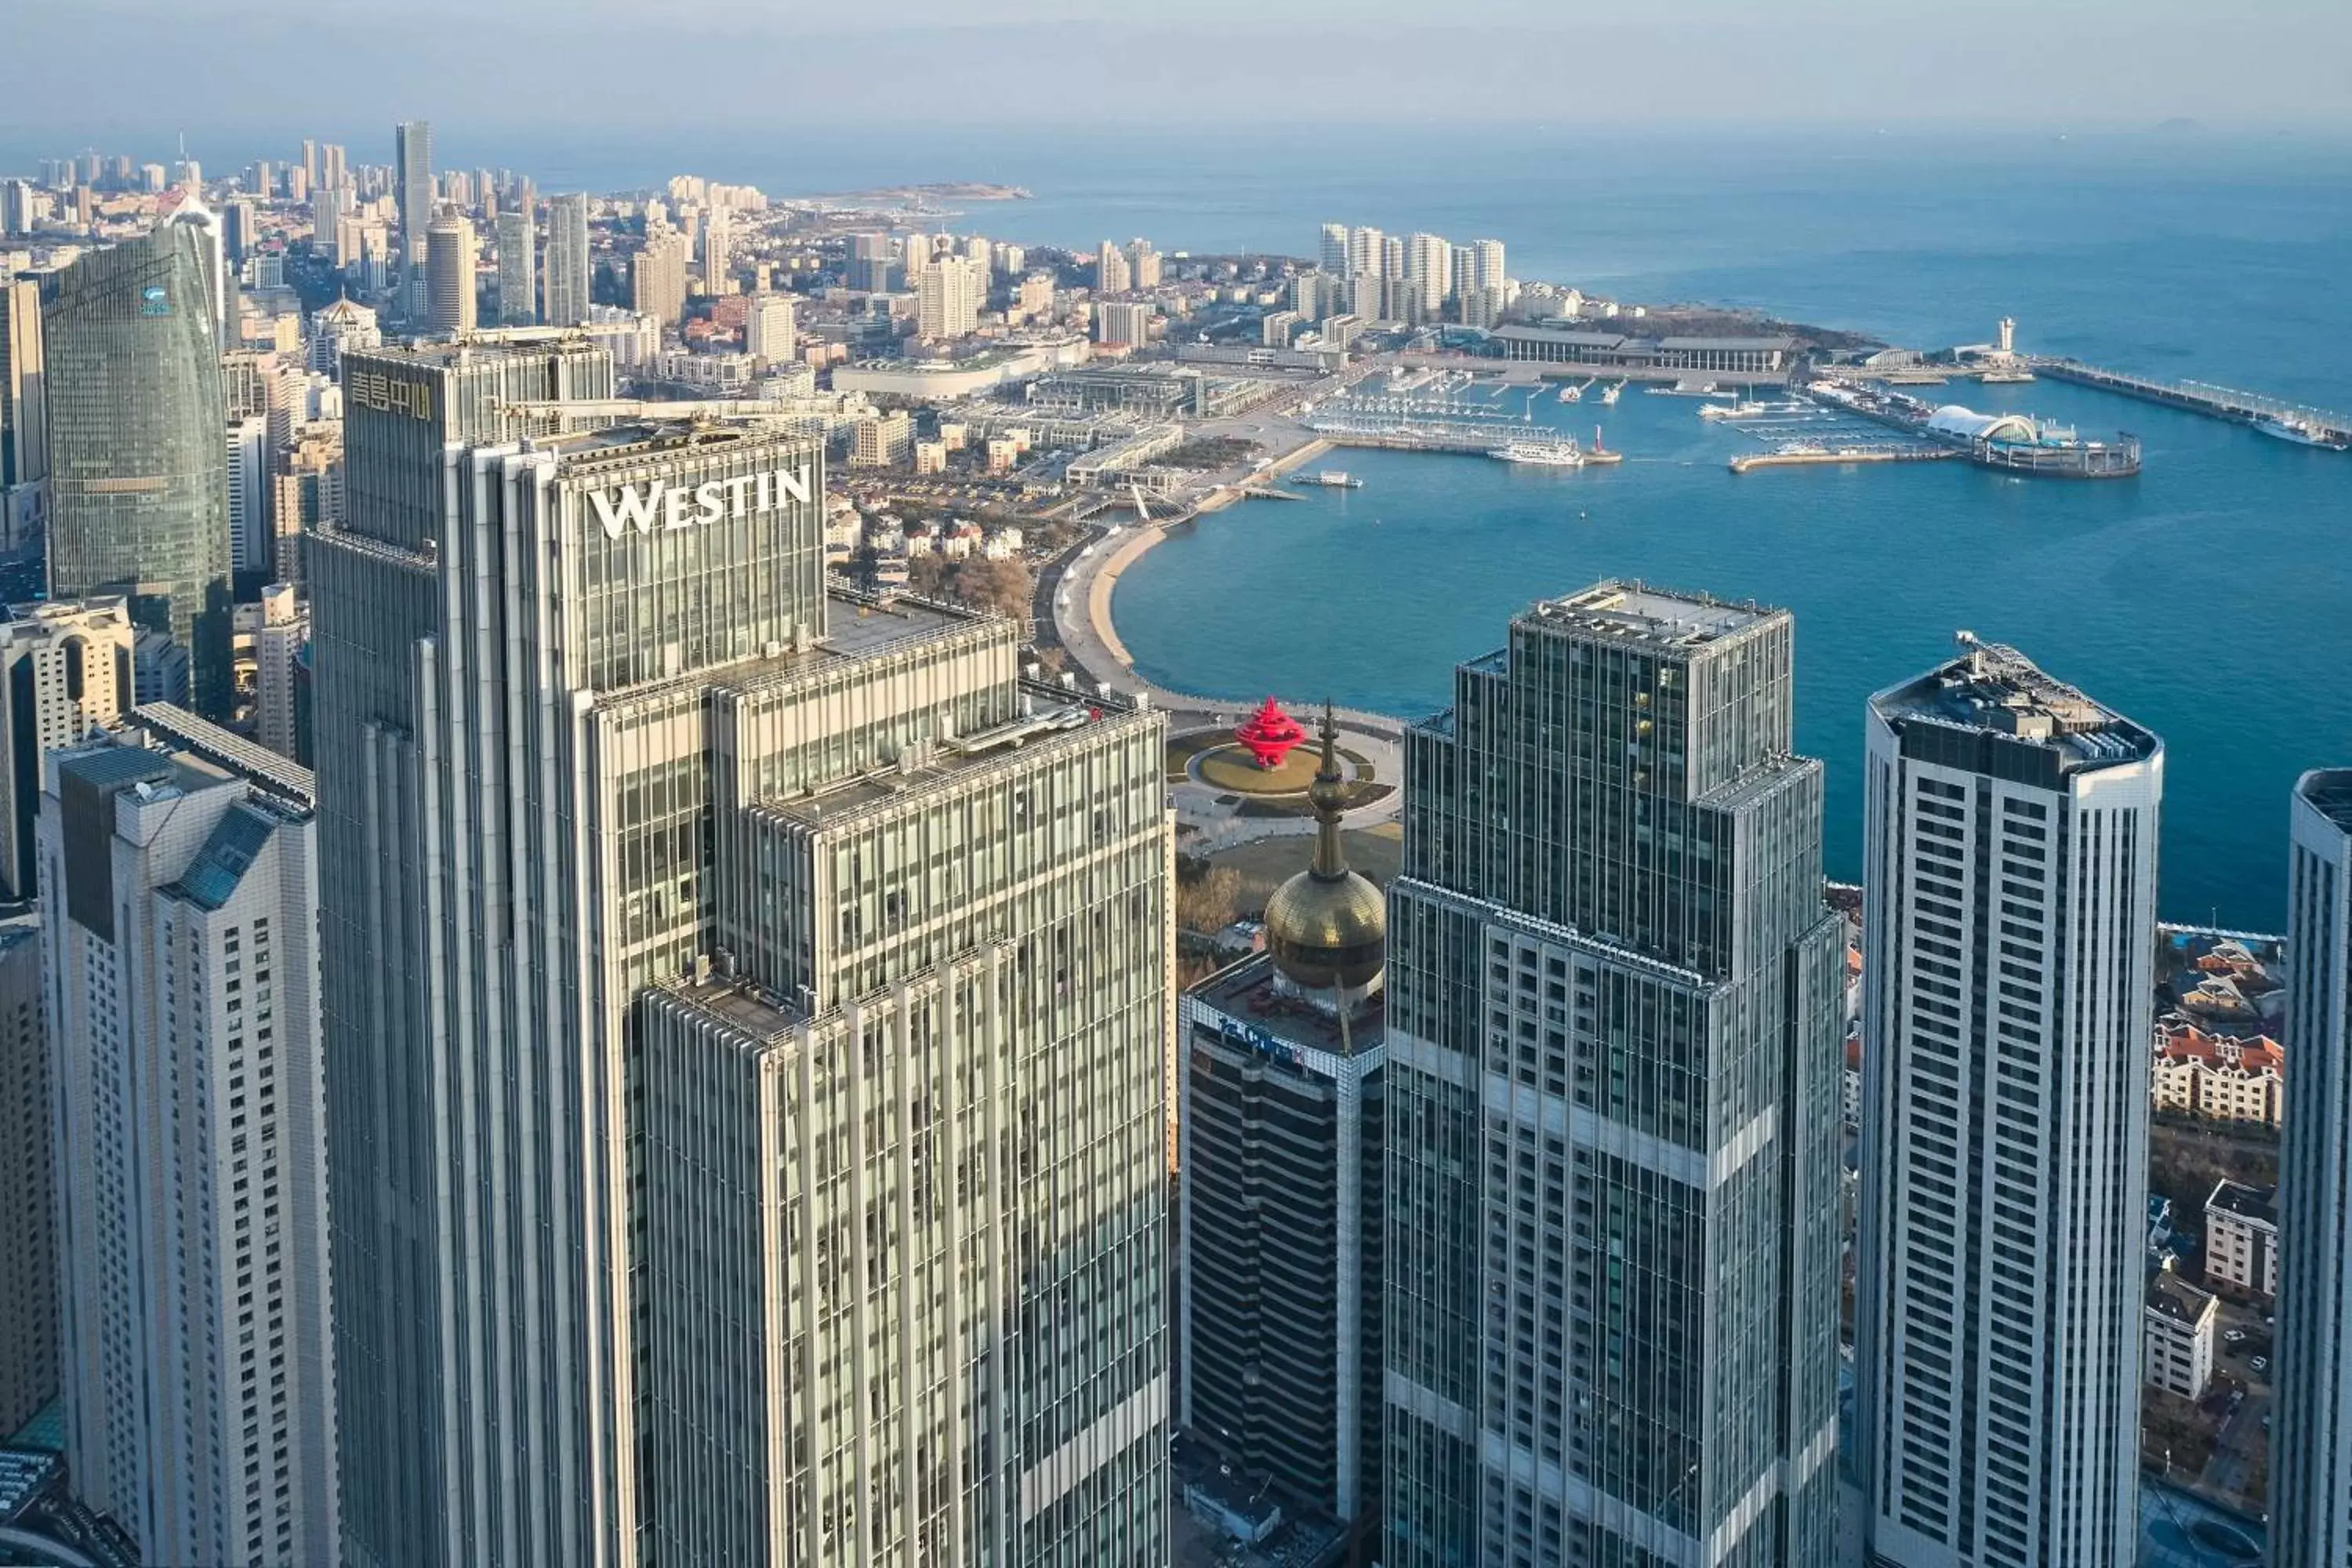 Property building in The Westin Qingdao - Instagrammable